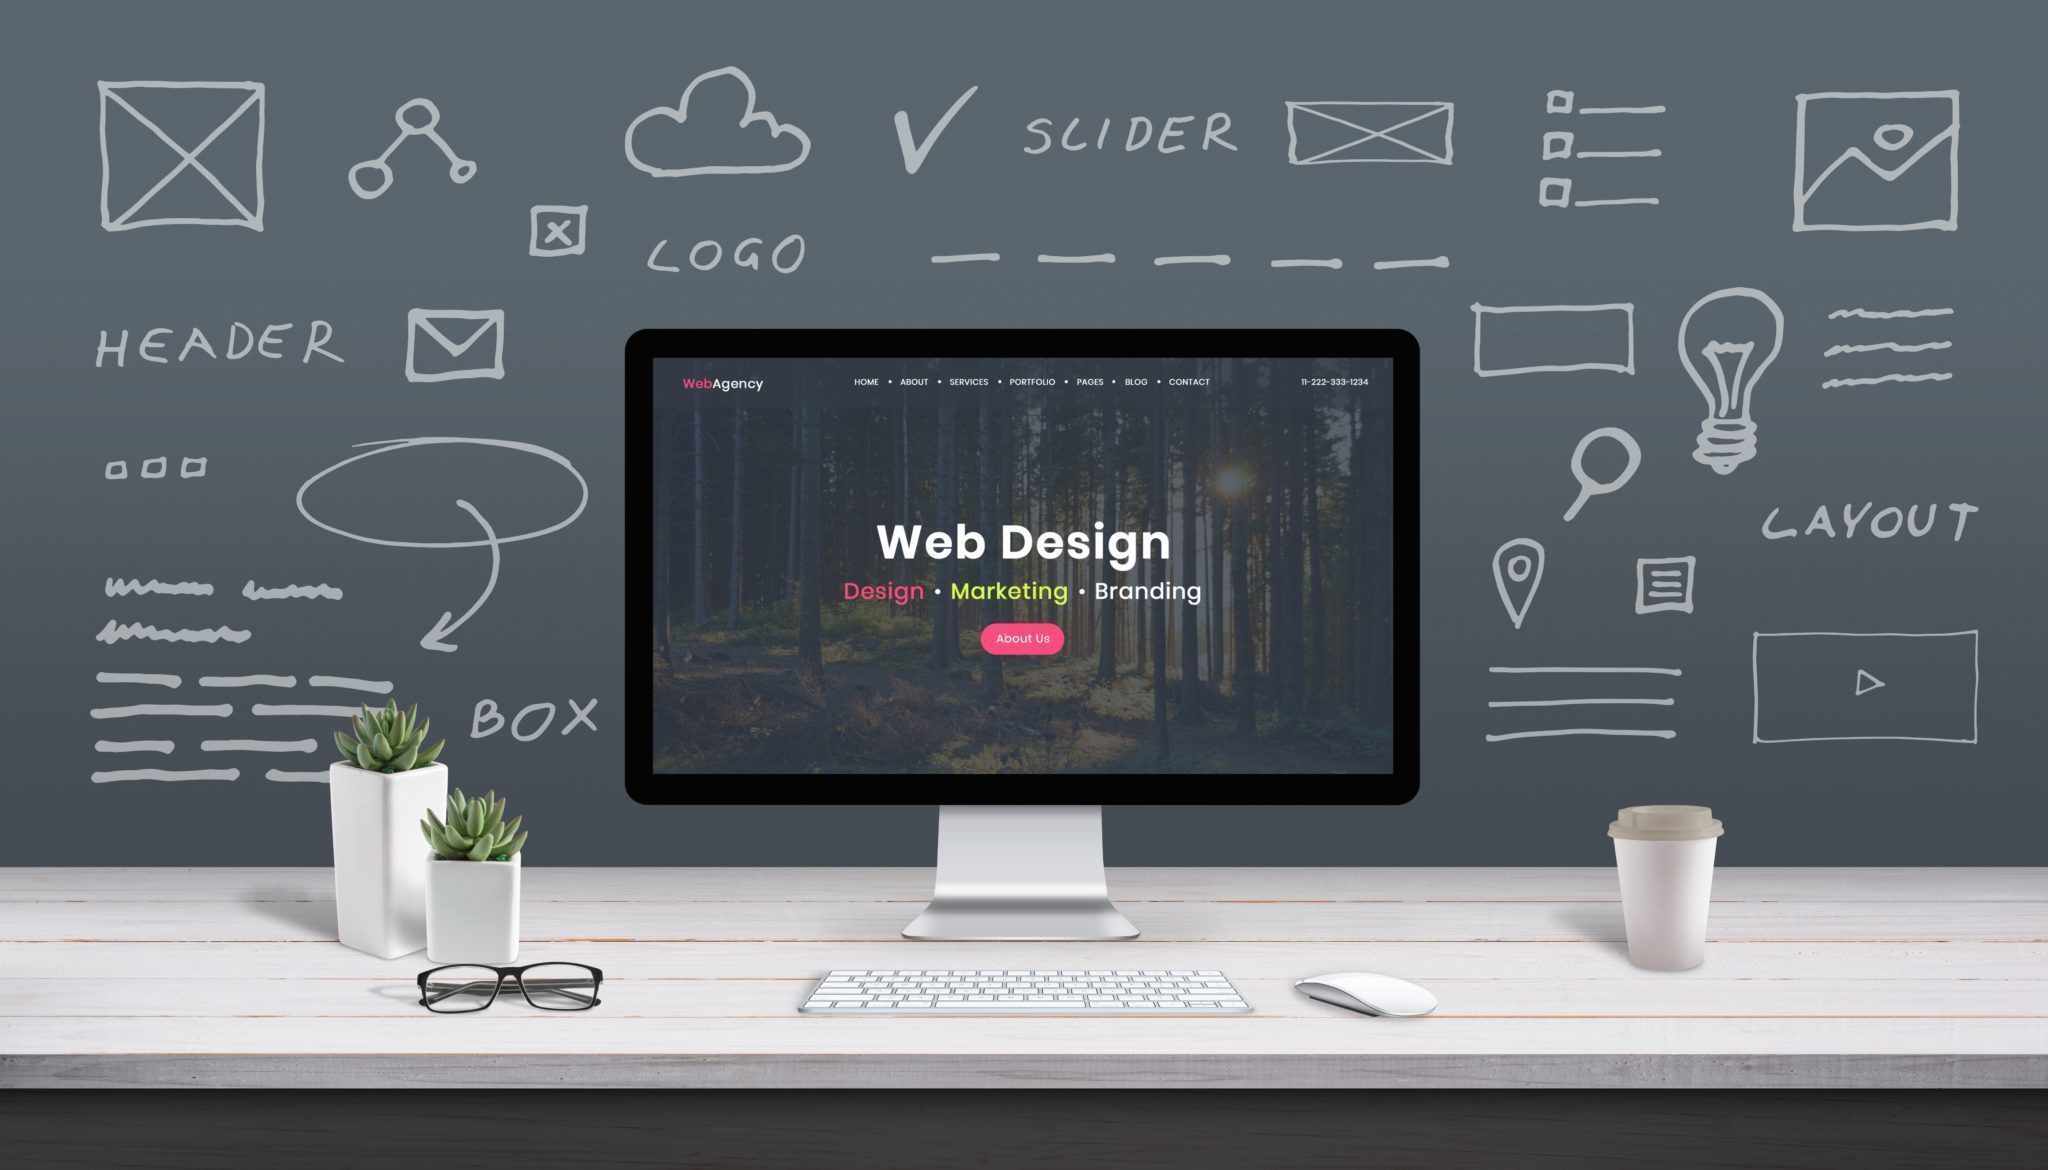 7 Qualities Of An Outstanding Web Design Agency - Cultures Connection